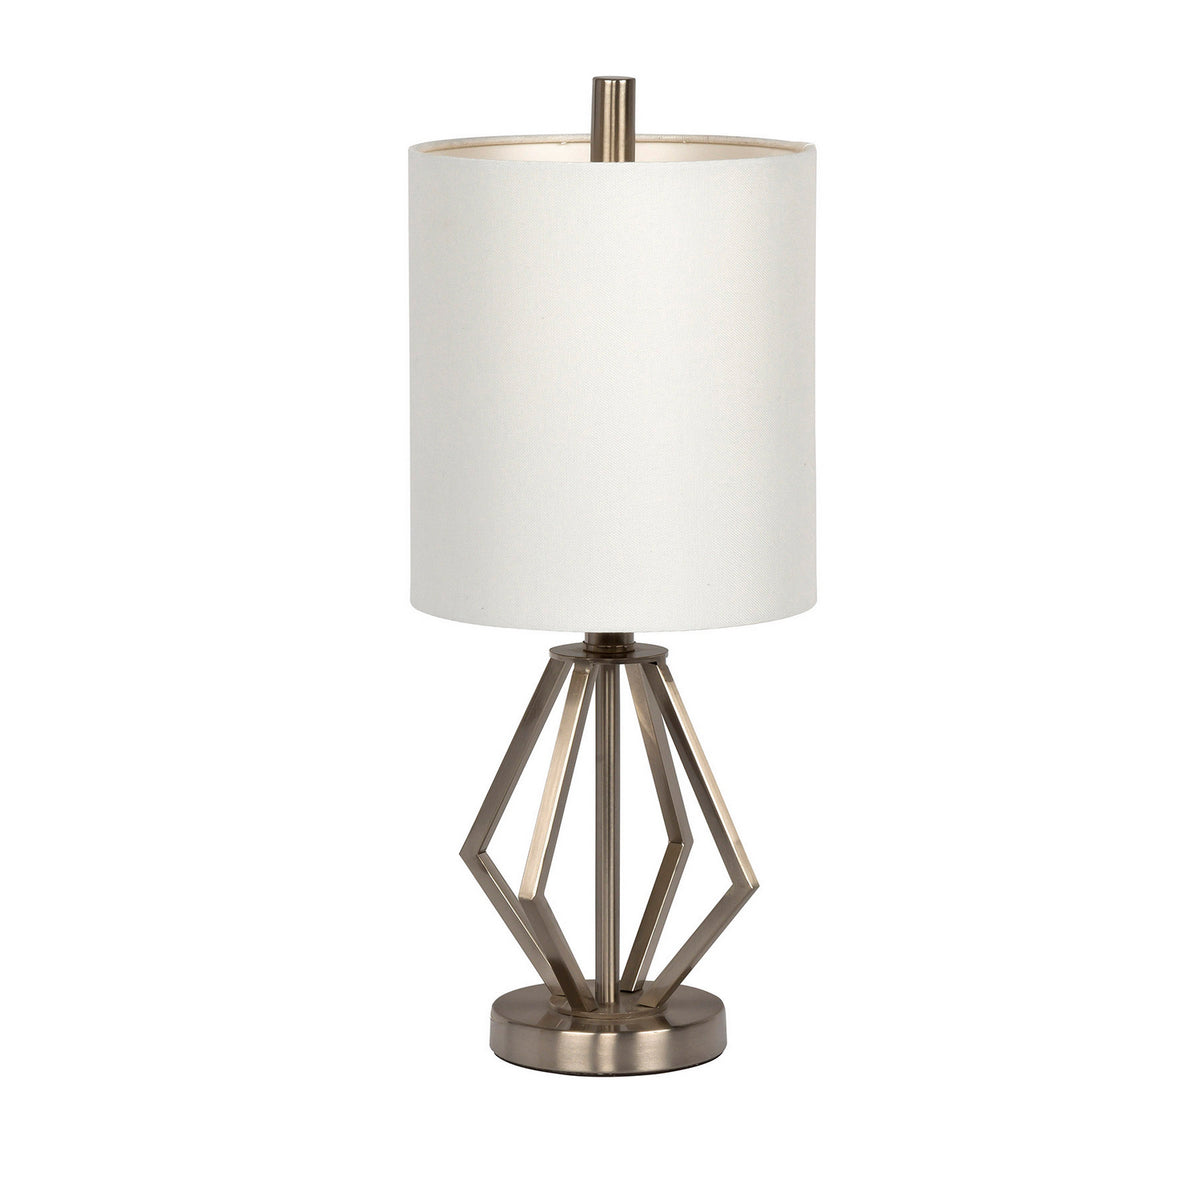 Craftmade - 86233 - One Light Table Lamp - Table Lamp - Brushed Polished Nickel